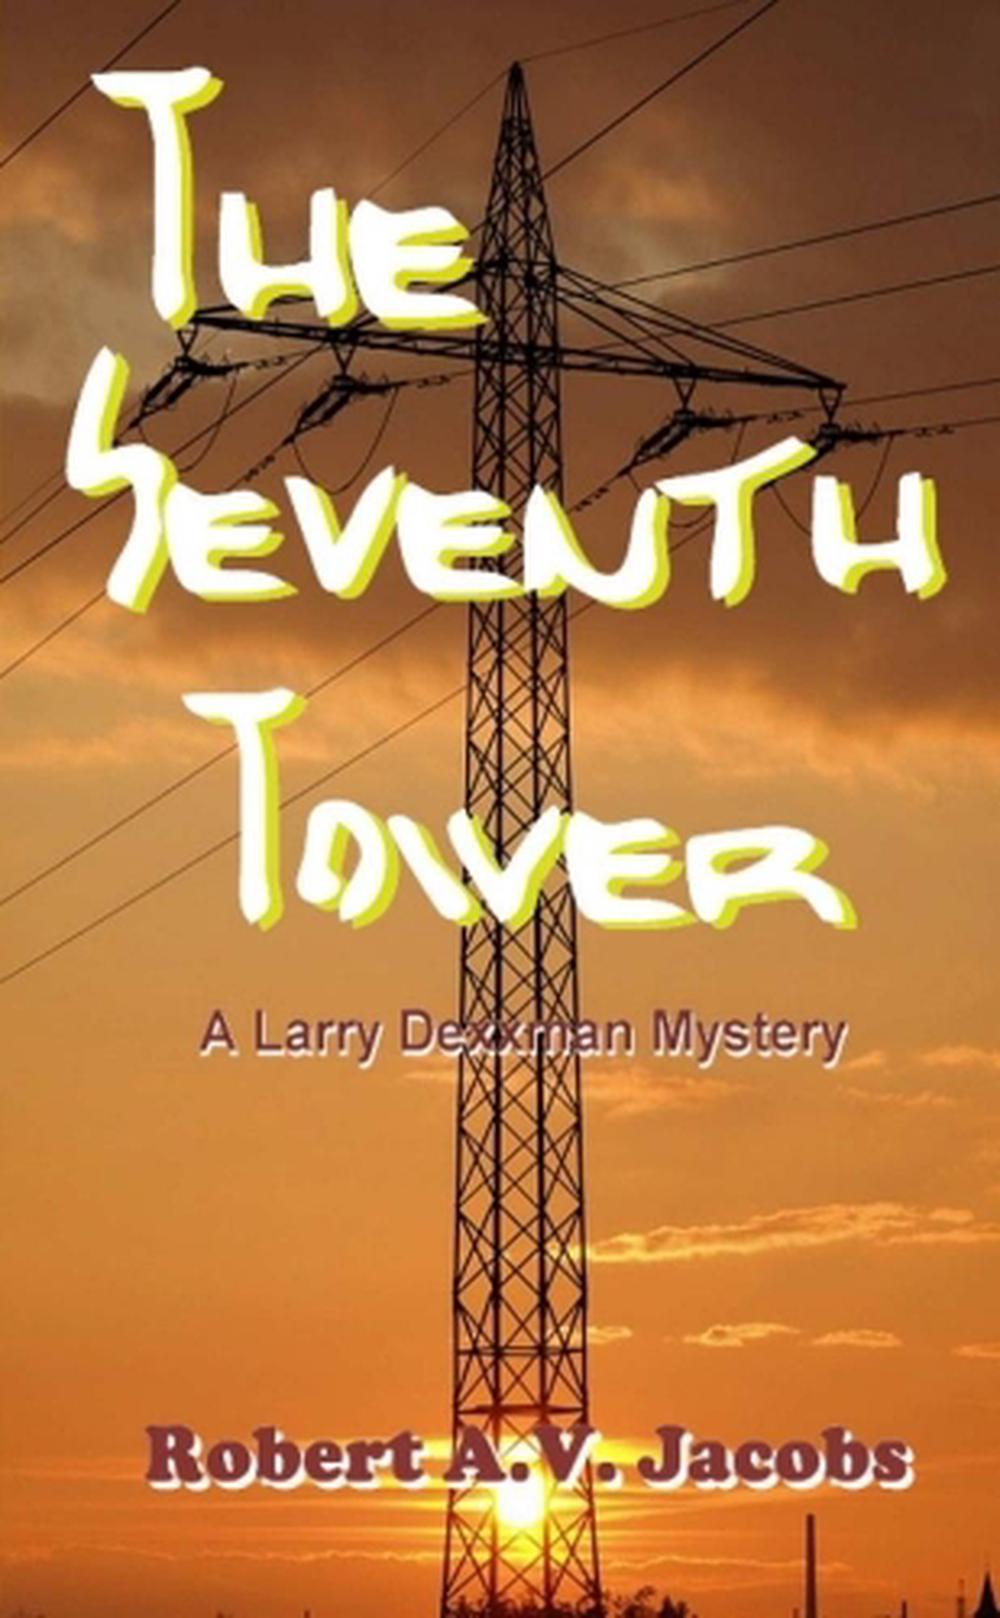 the seventh tower book series